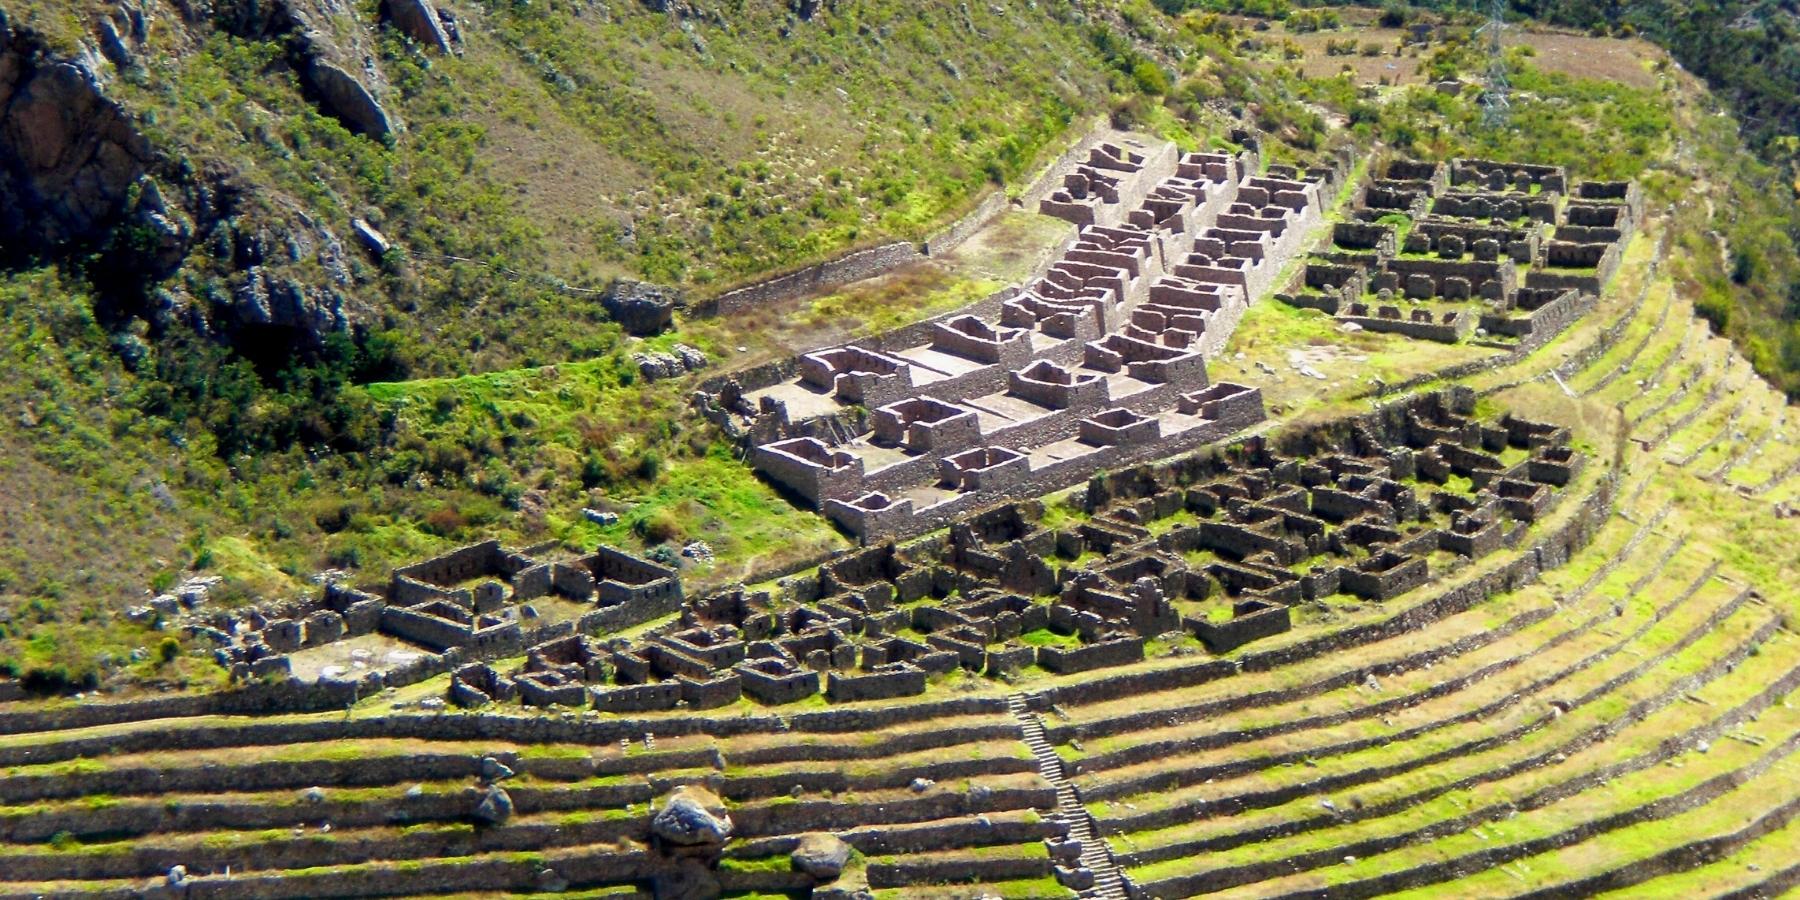 10.- HOW MUCH DOES IT COST TO DO THE INCA TRAIL TO MACHU PICCHU?